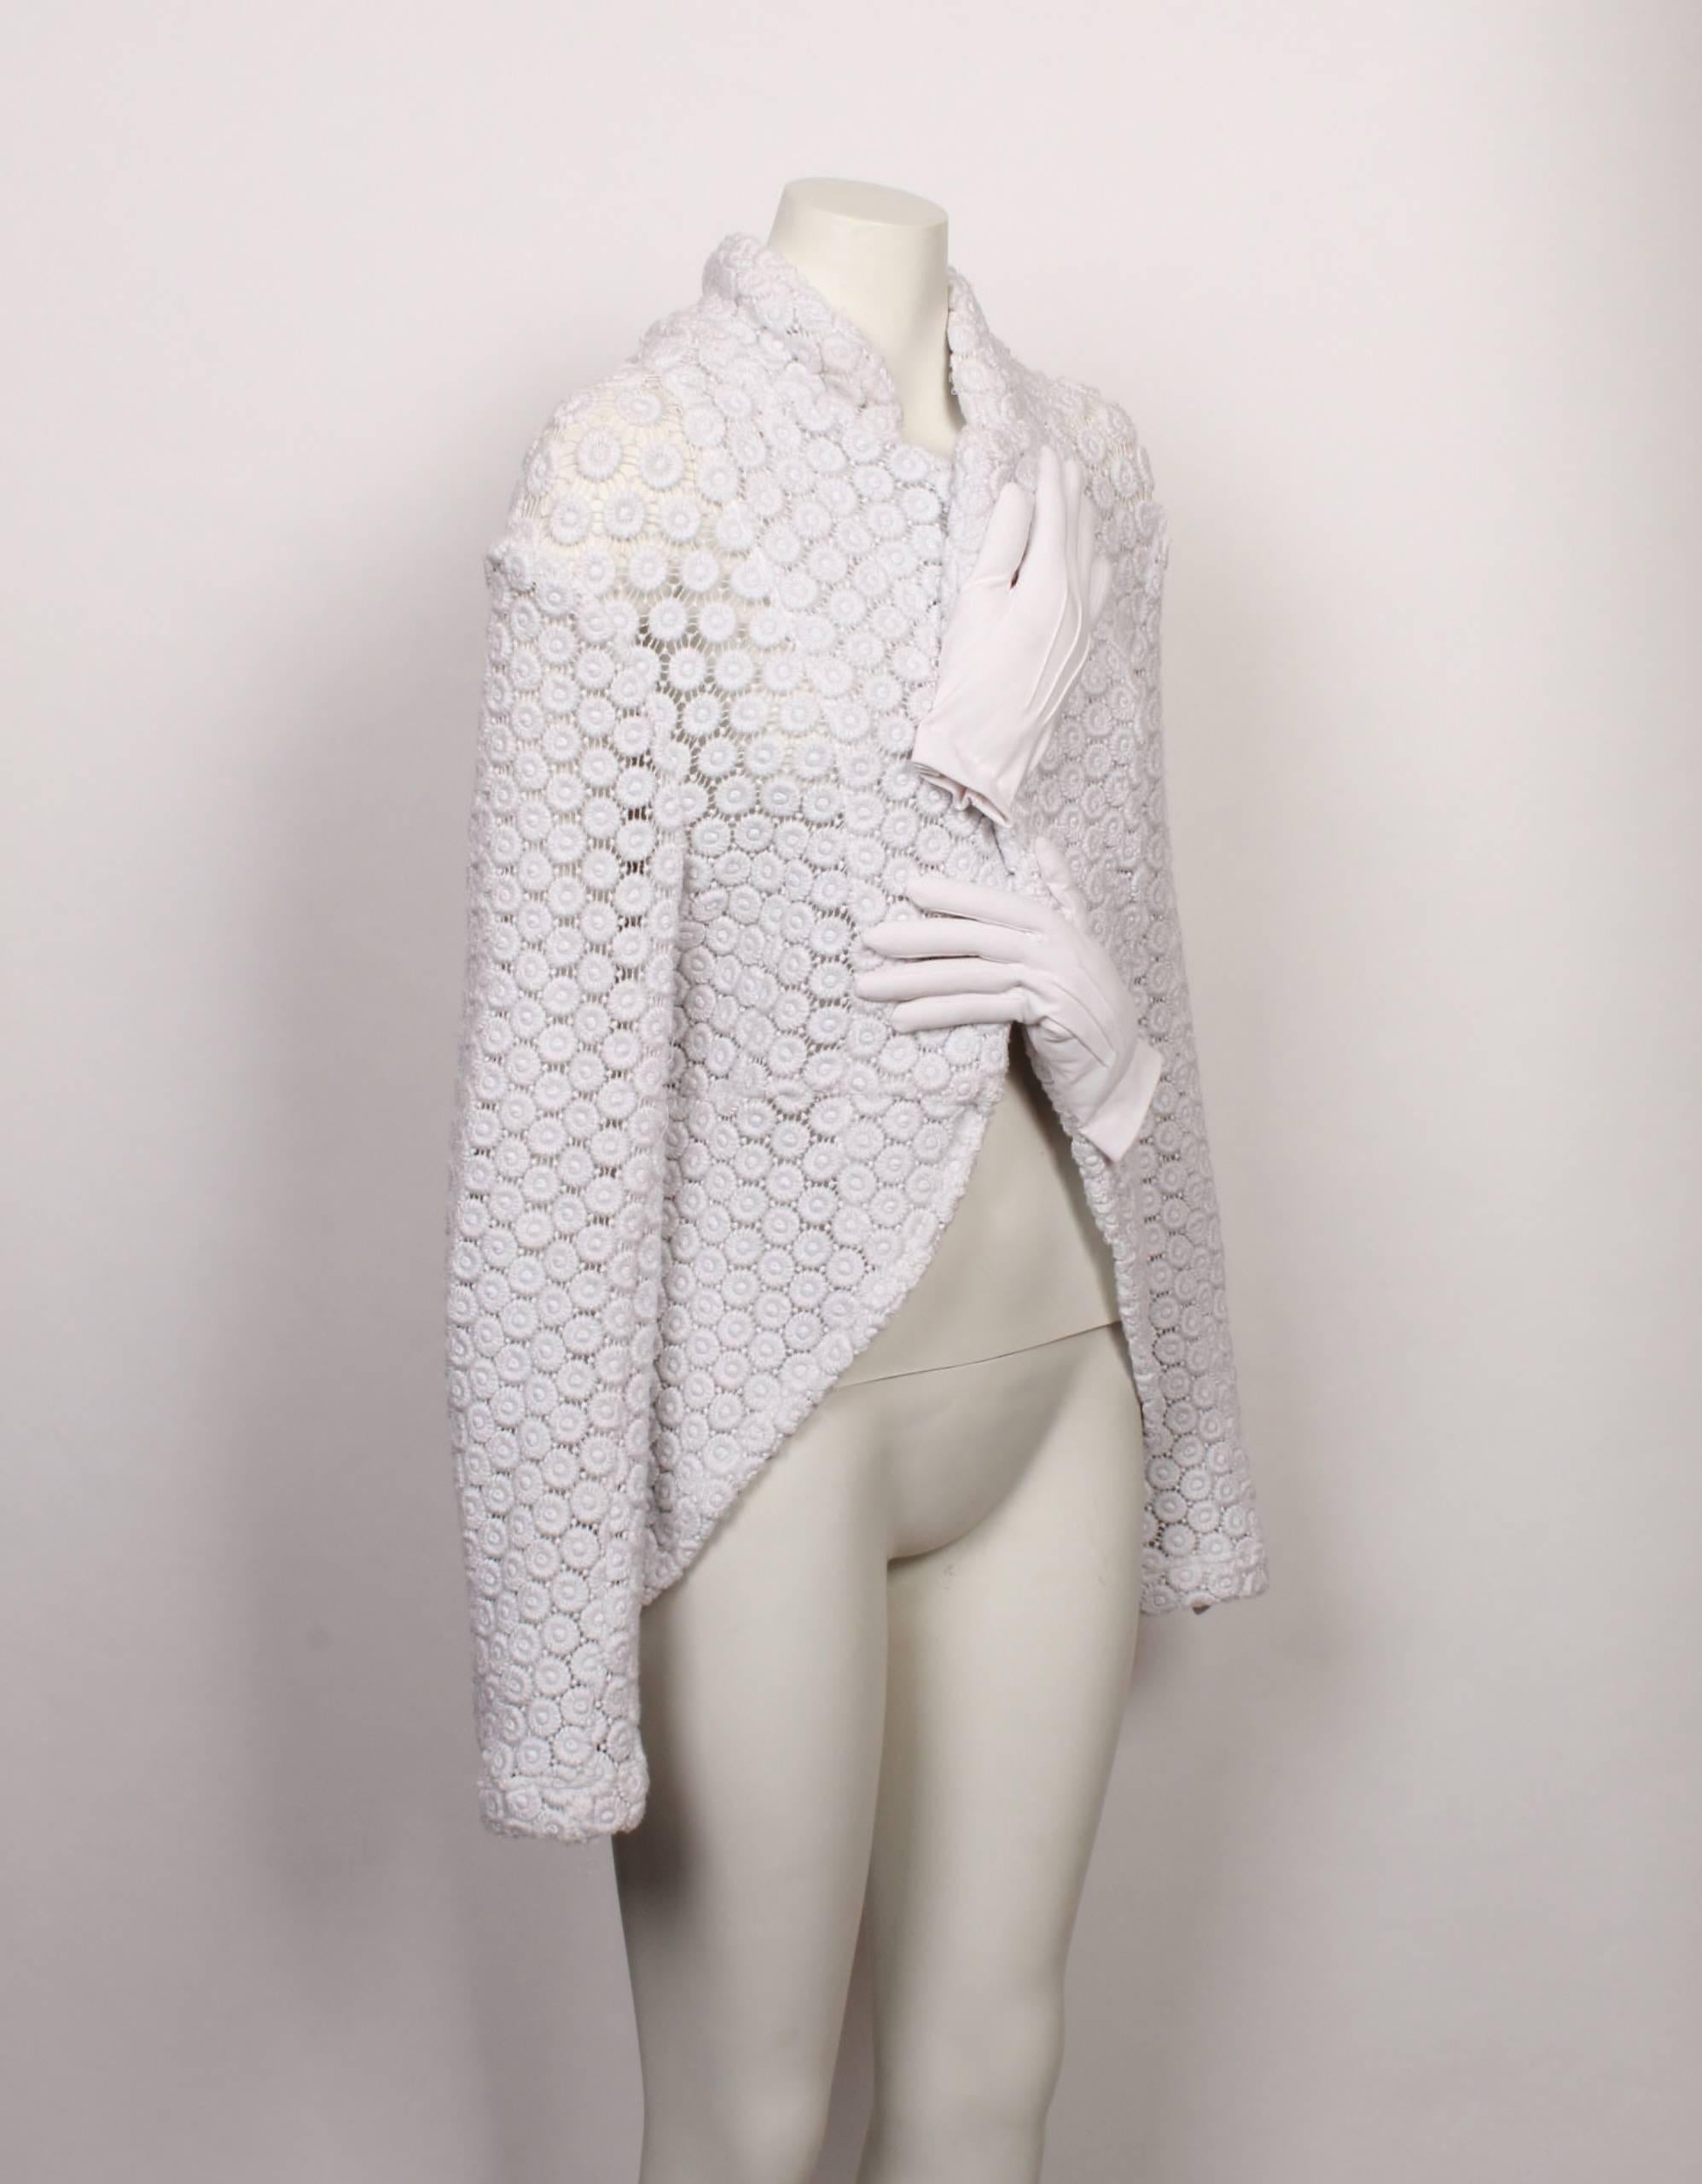 Iconic COMME des GARÇONS white knitted tailcoat with padded hand attachments from the 2007 Autumn/Winter collection.
Textured sheer white daisy Guipure lace, this rare jacket is a collector's item. 
Pull on with no fastenings, turn back collar and